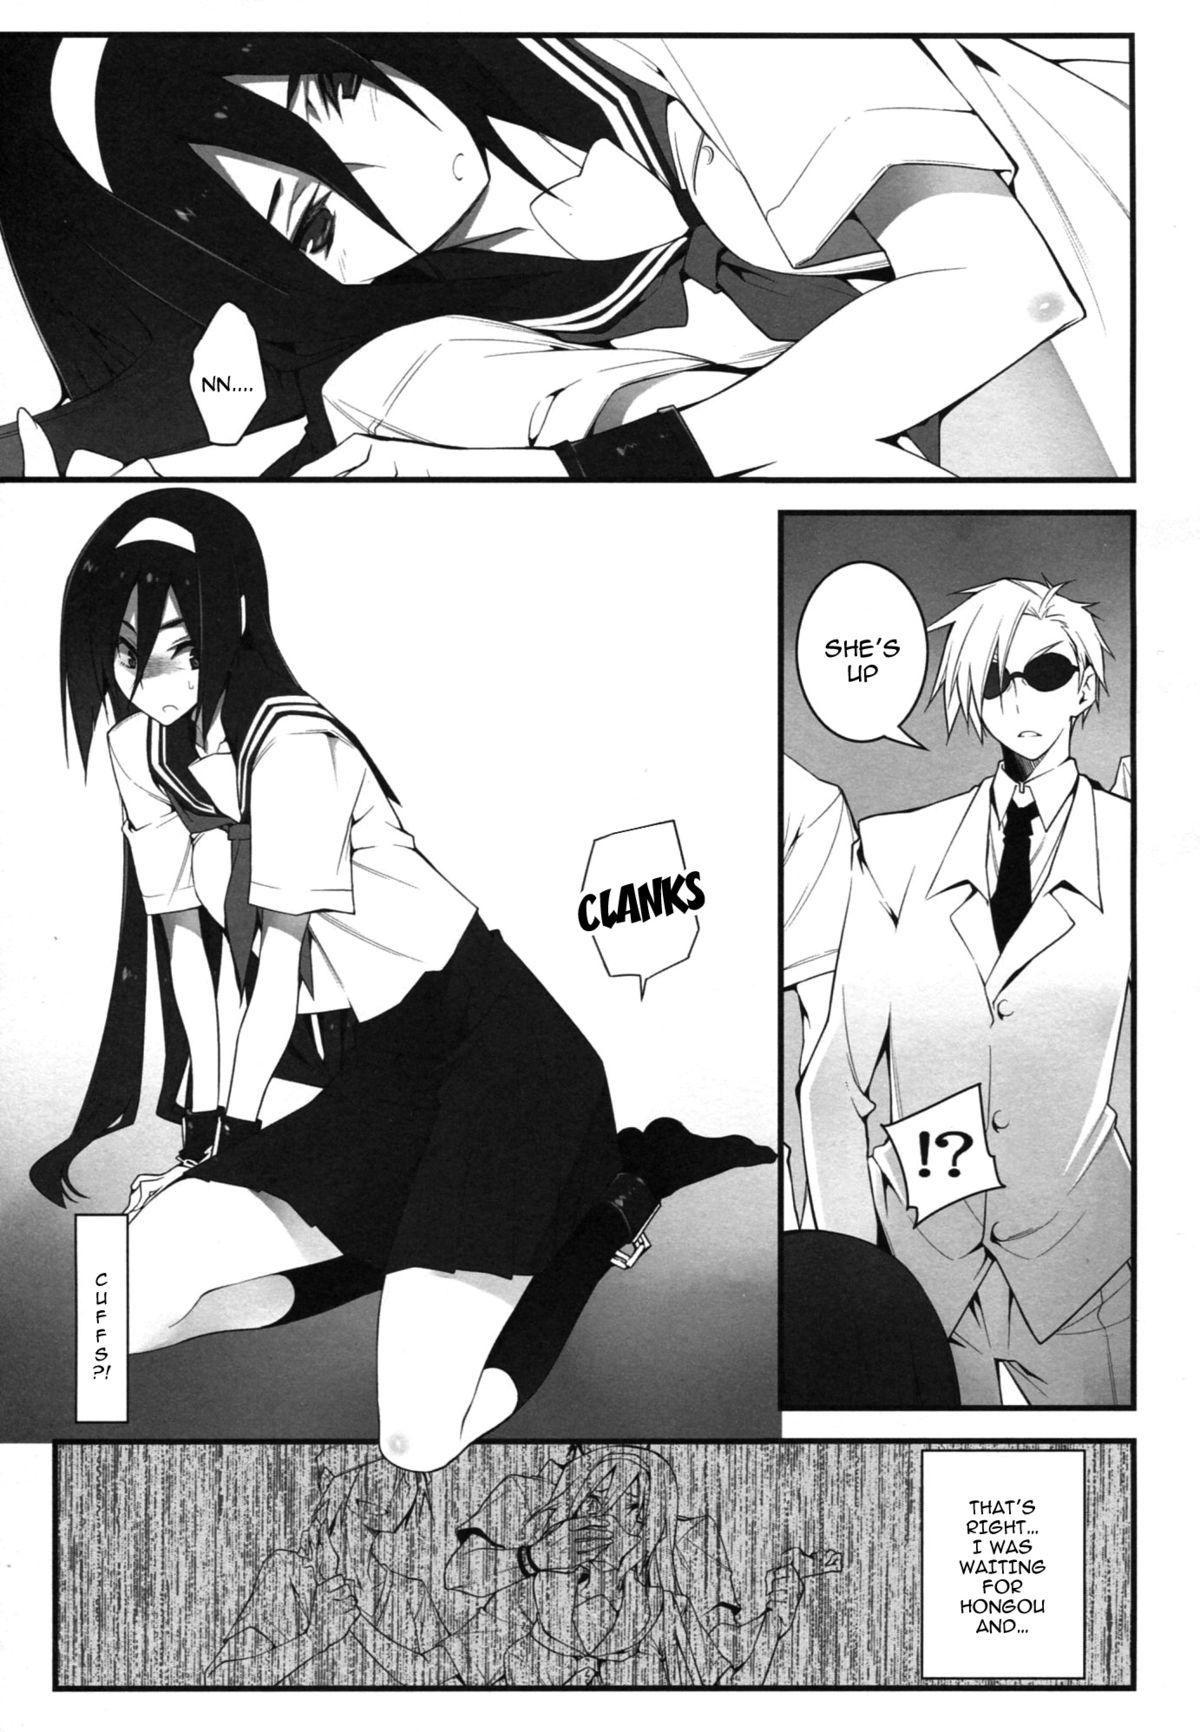 Fucking THE EMPRESS REVERSED - Hyouka Skinny - Page 6